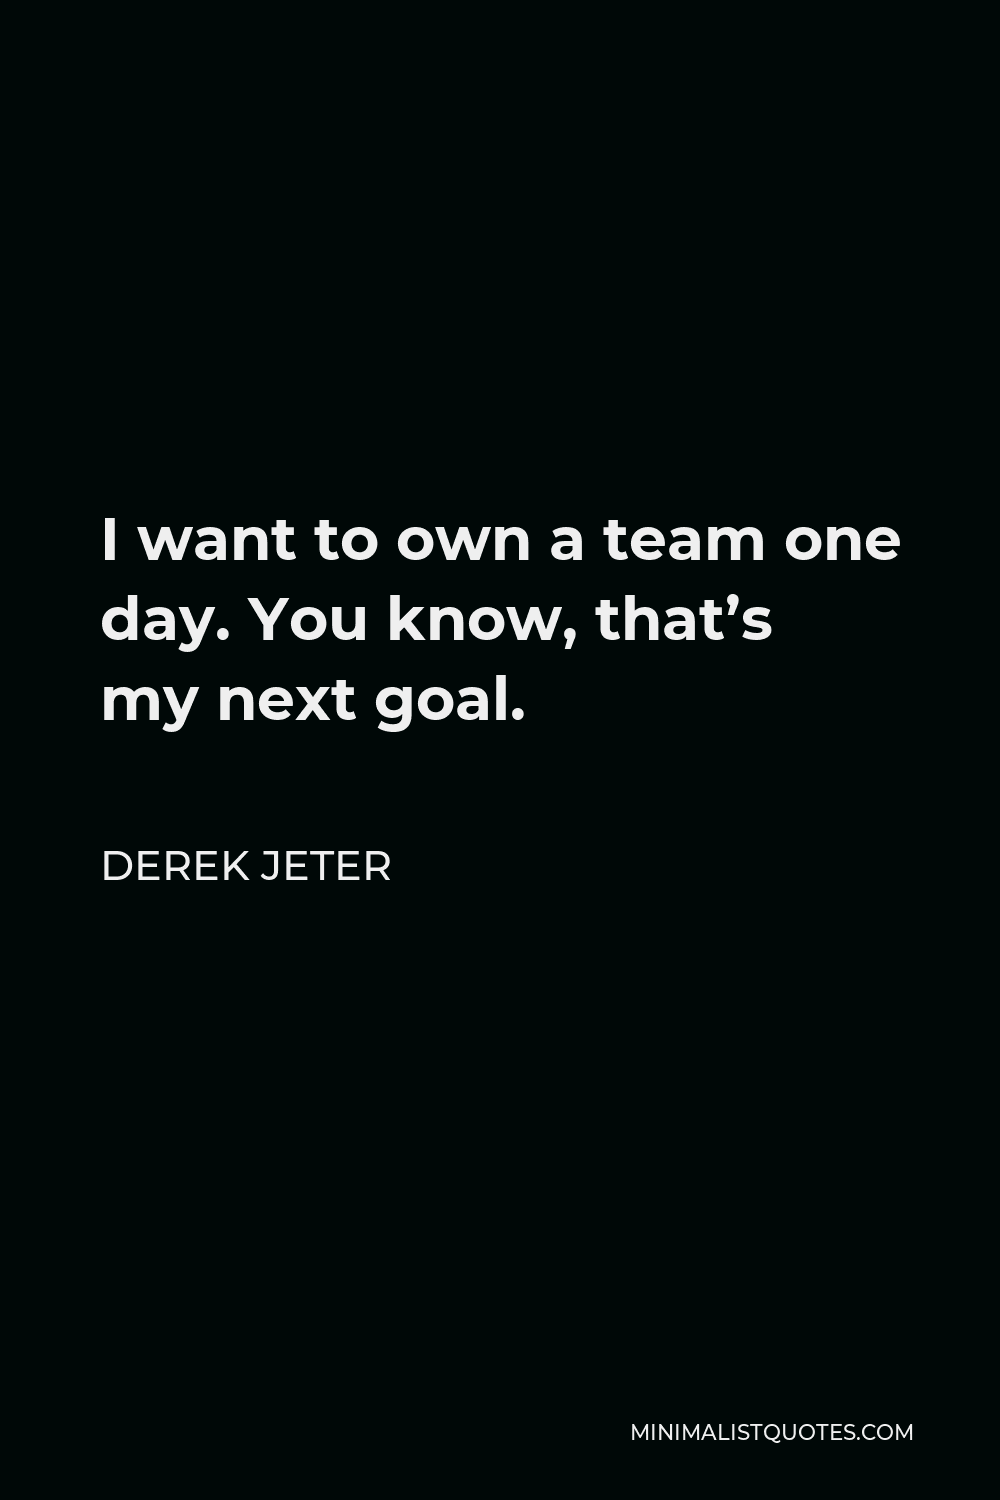 Derek Jeter Quote - I want to own a team one day. You know, that’s my next goal.